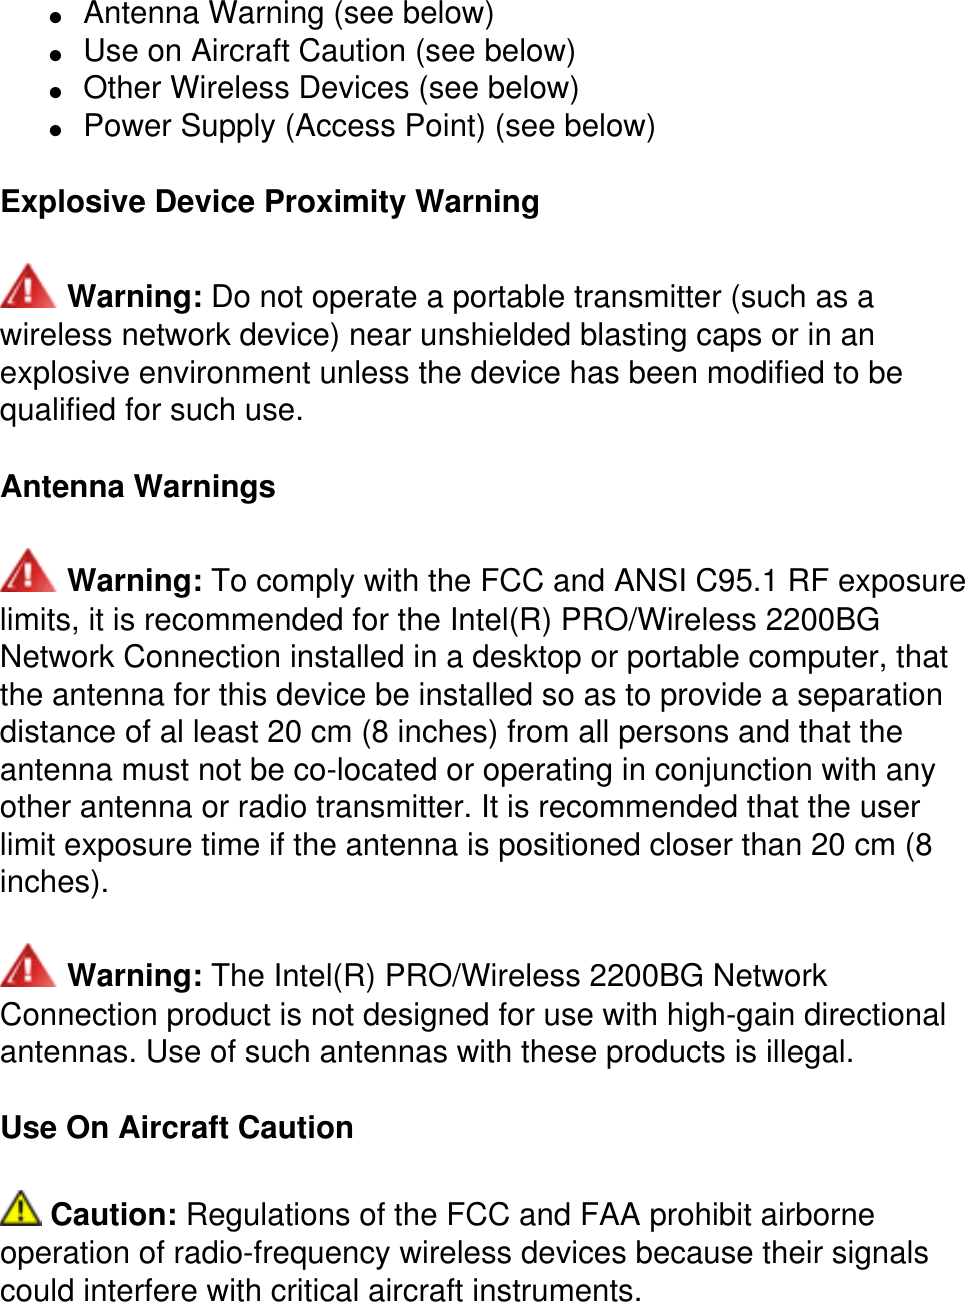 ●     Antenna Warning (see below) ●     Use on Aircraft Caution (see below) ●     Other Wireless Devices (see below) ●     Power Supply (Access Point) (see below)Explosive Device Proximity Warning Warning: Do not operate a portable transmitter (such as a wireless network device) near unshielded blasting caps or in an explosive environment unless the device has been modified to be qualified for such use.Antenna Warnings Warning: To comply with the FCC and ANSI C95.1 RF exposure limits, it is recommended for the Intel(R) PRO/Wireless 2200BG Network Connection installed in a desktop or portable computer, that the antenna for this device be installed so as to provide a separation distance of al least 20 cm (8 inches) from all persons and that the antenna must not be co-located or operating in conjunction with any other antenna or radio transmitter. It is recommended that the user limit exposure time if the antenna is positioned closer than 20 cm (8 inches). Warning: The Intel(R) PRO/Wireless 2200BG Network Connection product is not designed for use with high-gain directional antennas. Use of such antennas with these products is illegal.Use On Aircraft Caution Caution: Regulations of the FCC and FAA prohibit airborne operation of radio-frequency wireless devices because their signals could interfere with critical aircraft instruments.